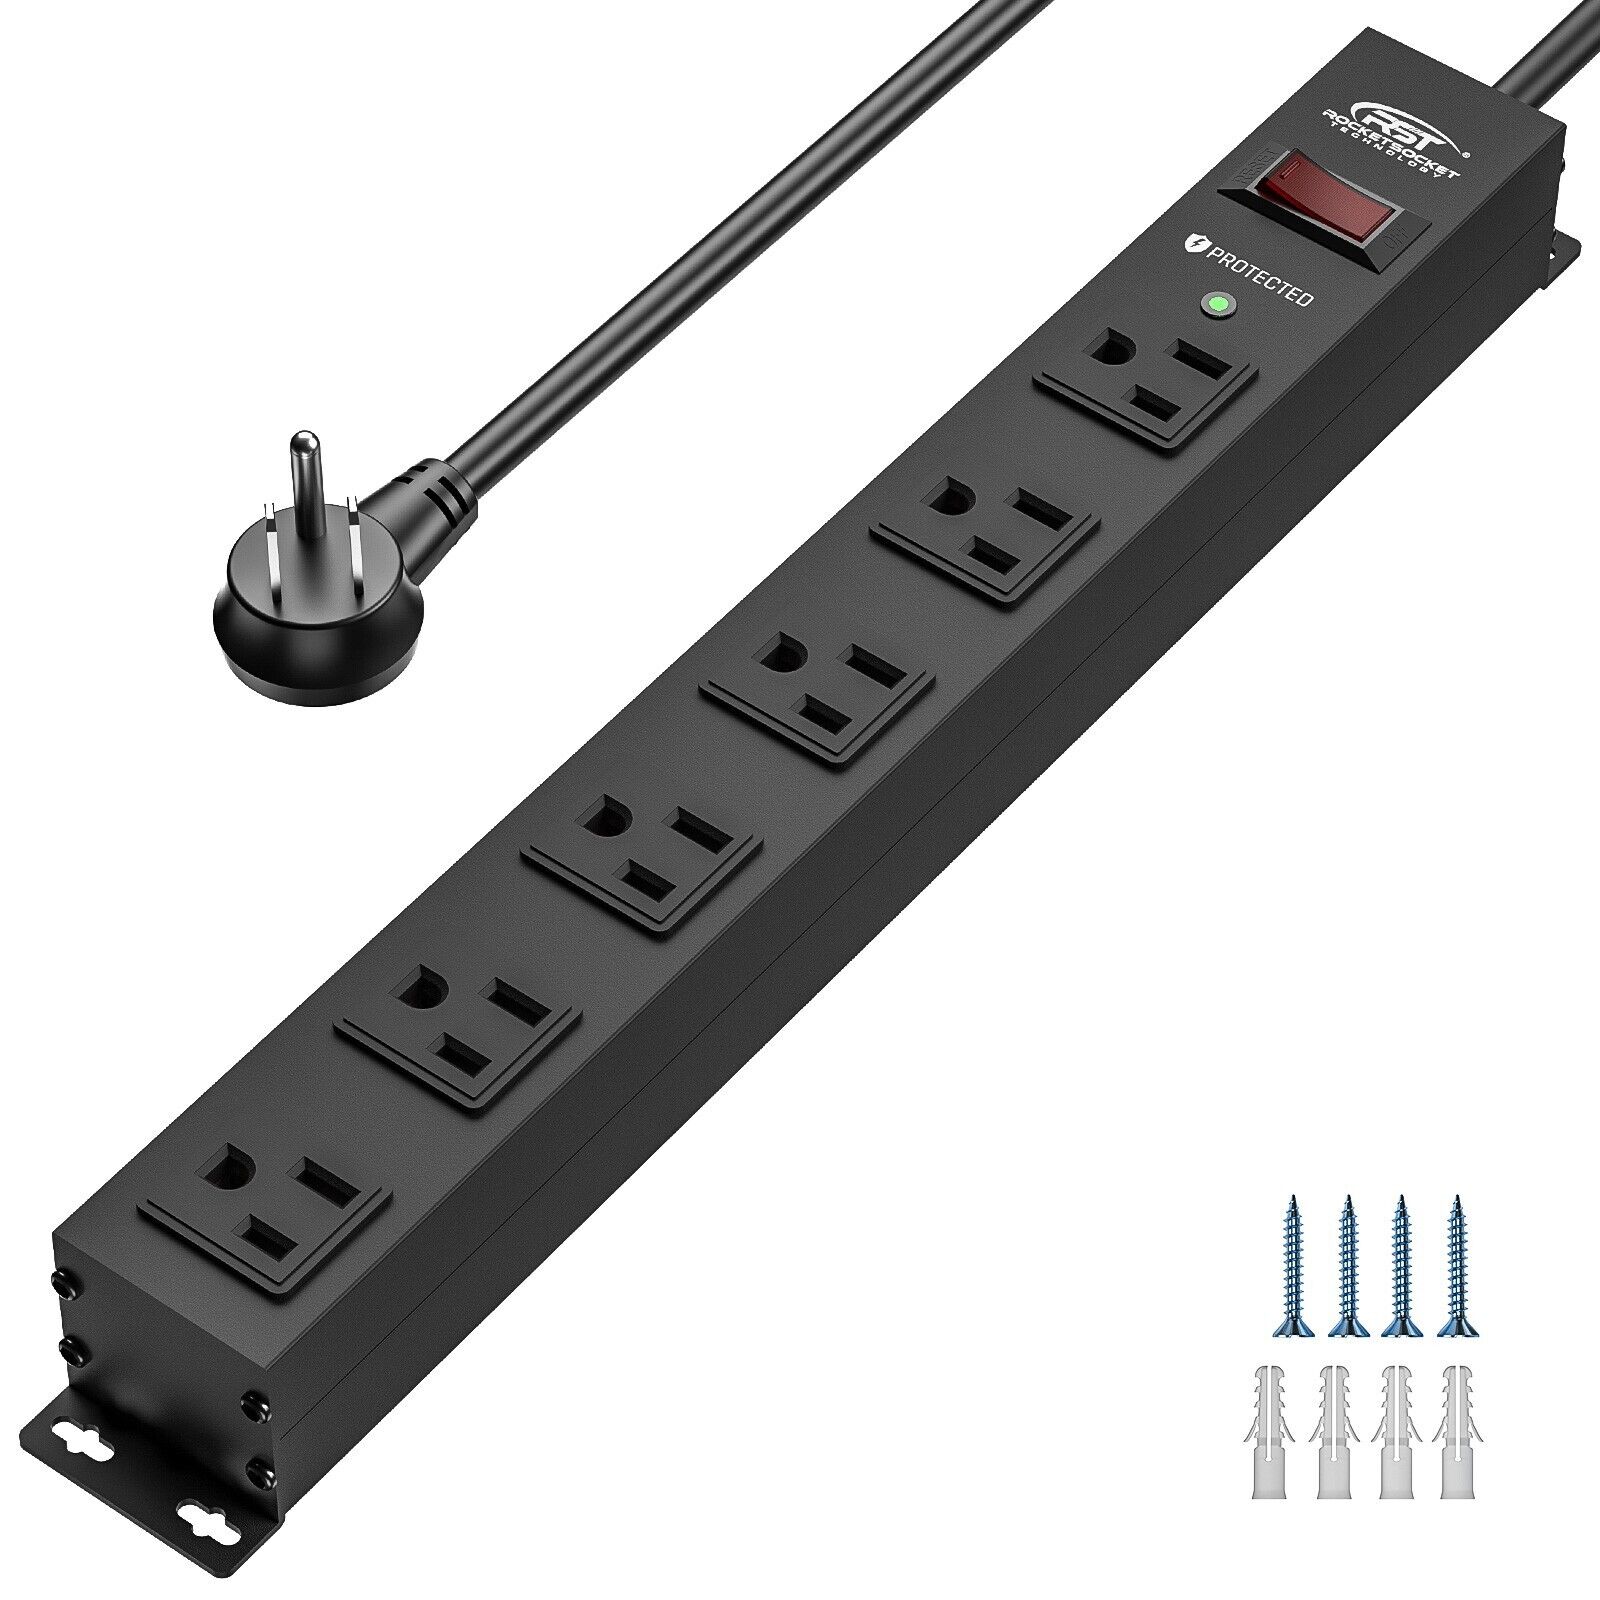 CRST 1875W 6 Outlet Heavy Duty Power Strip with Switch,Surge Protector,Mountable